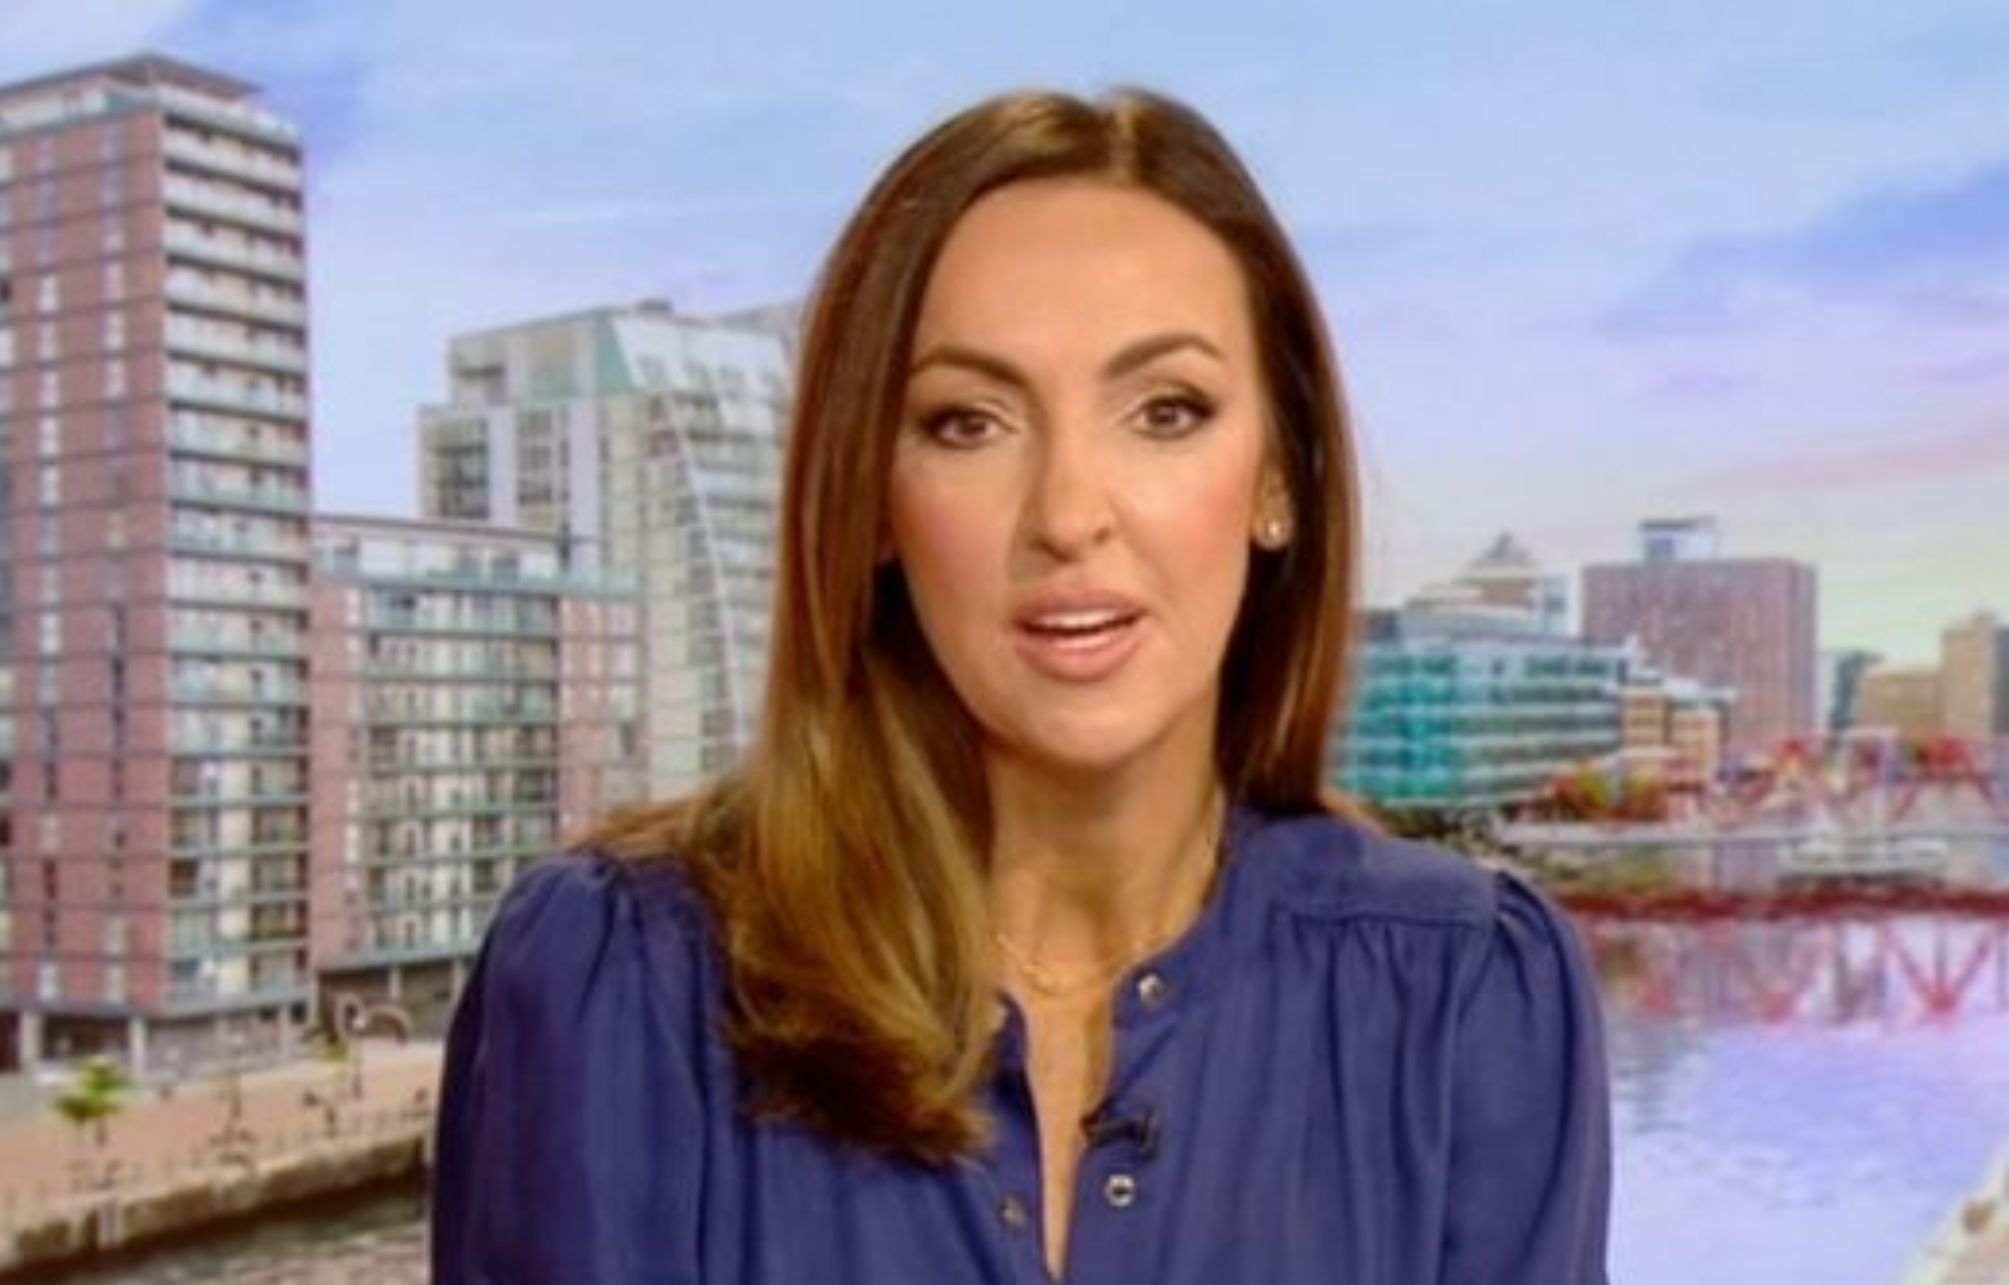 Is Sally Nugent Related To Natalie Pirks?